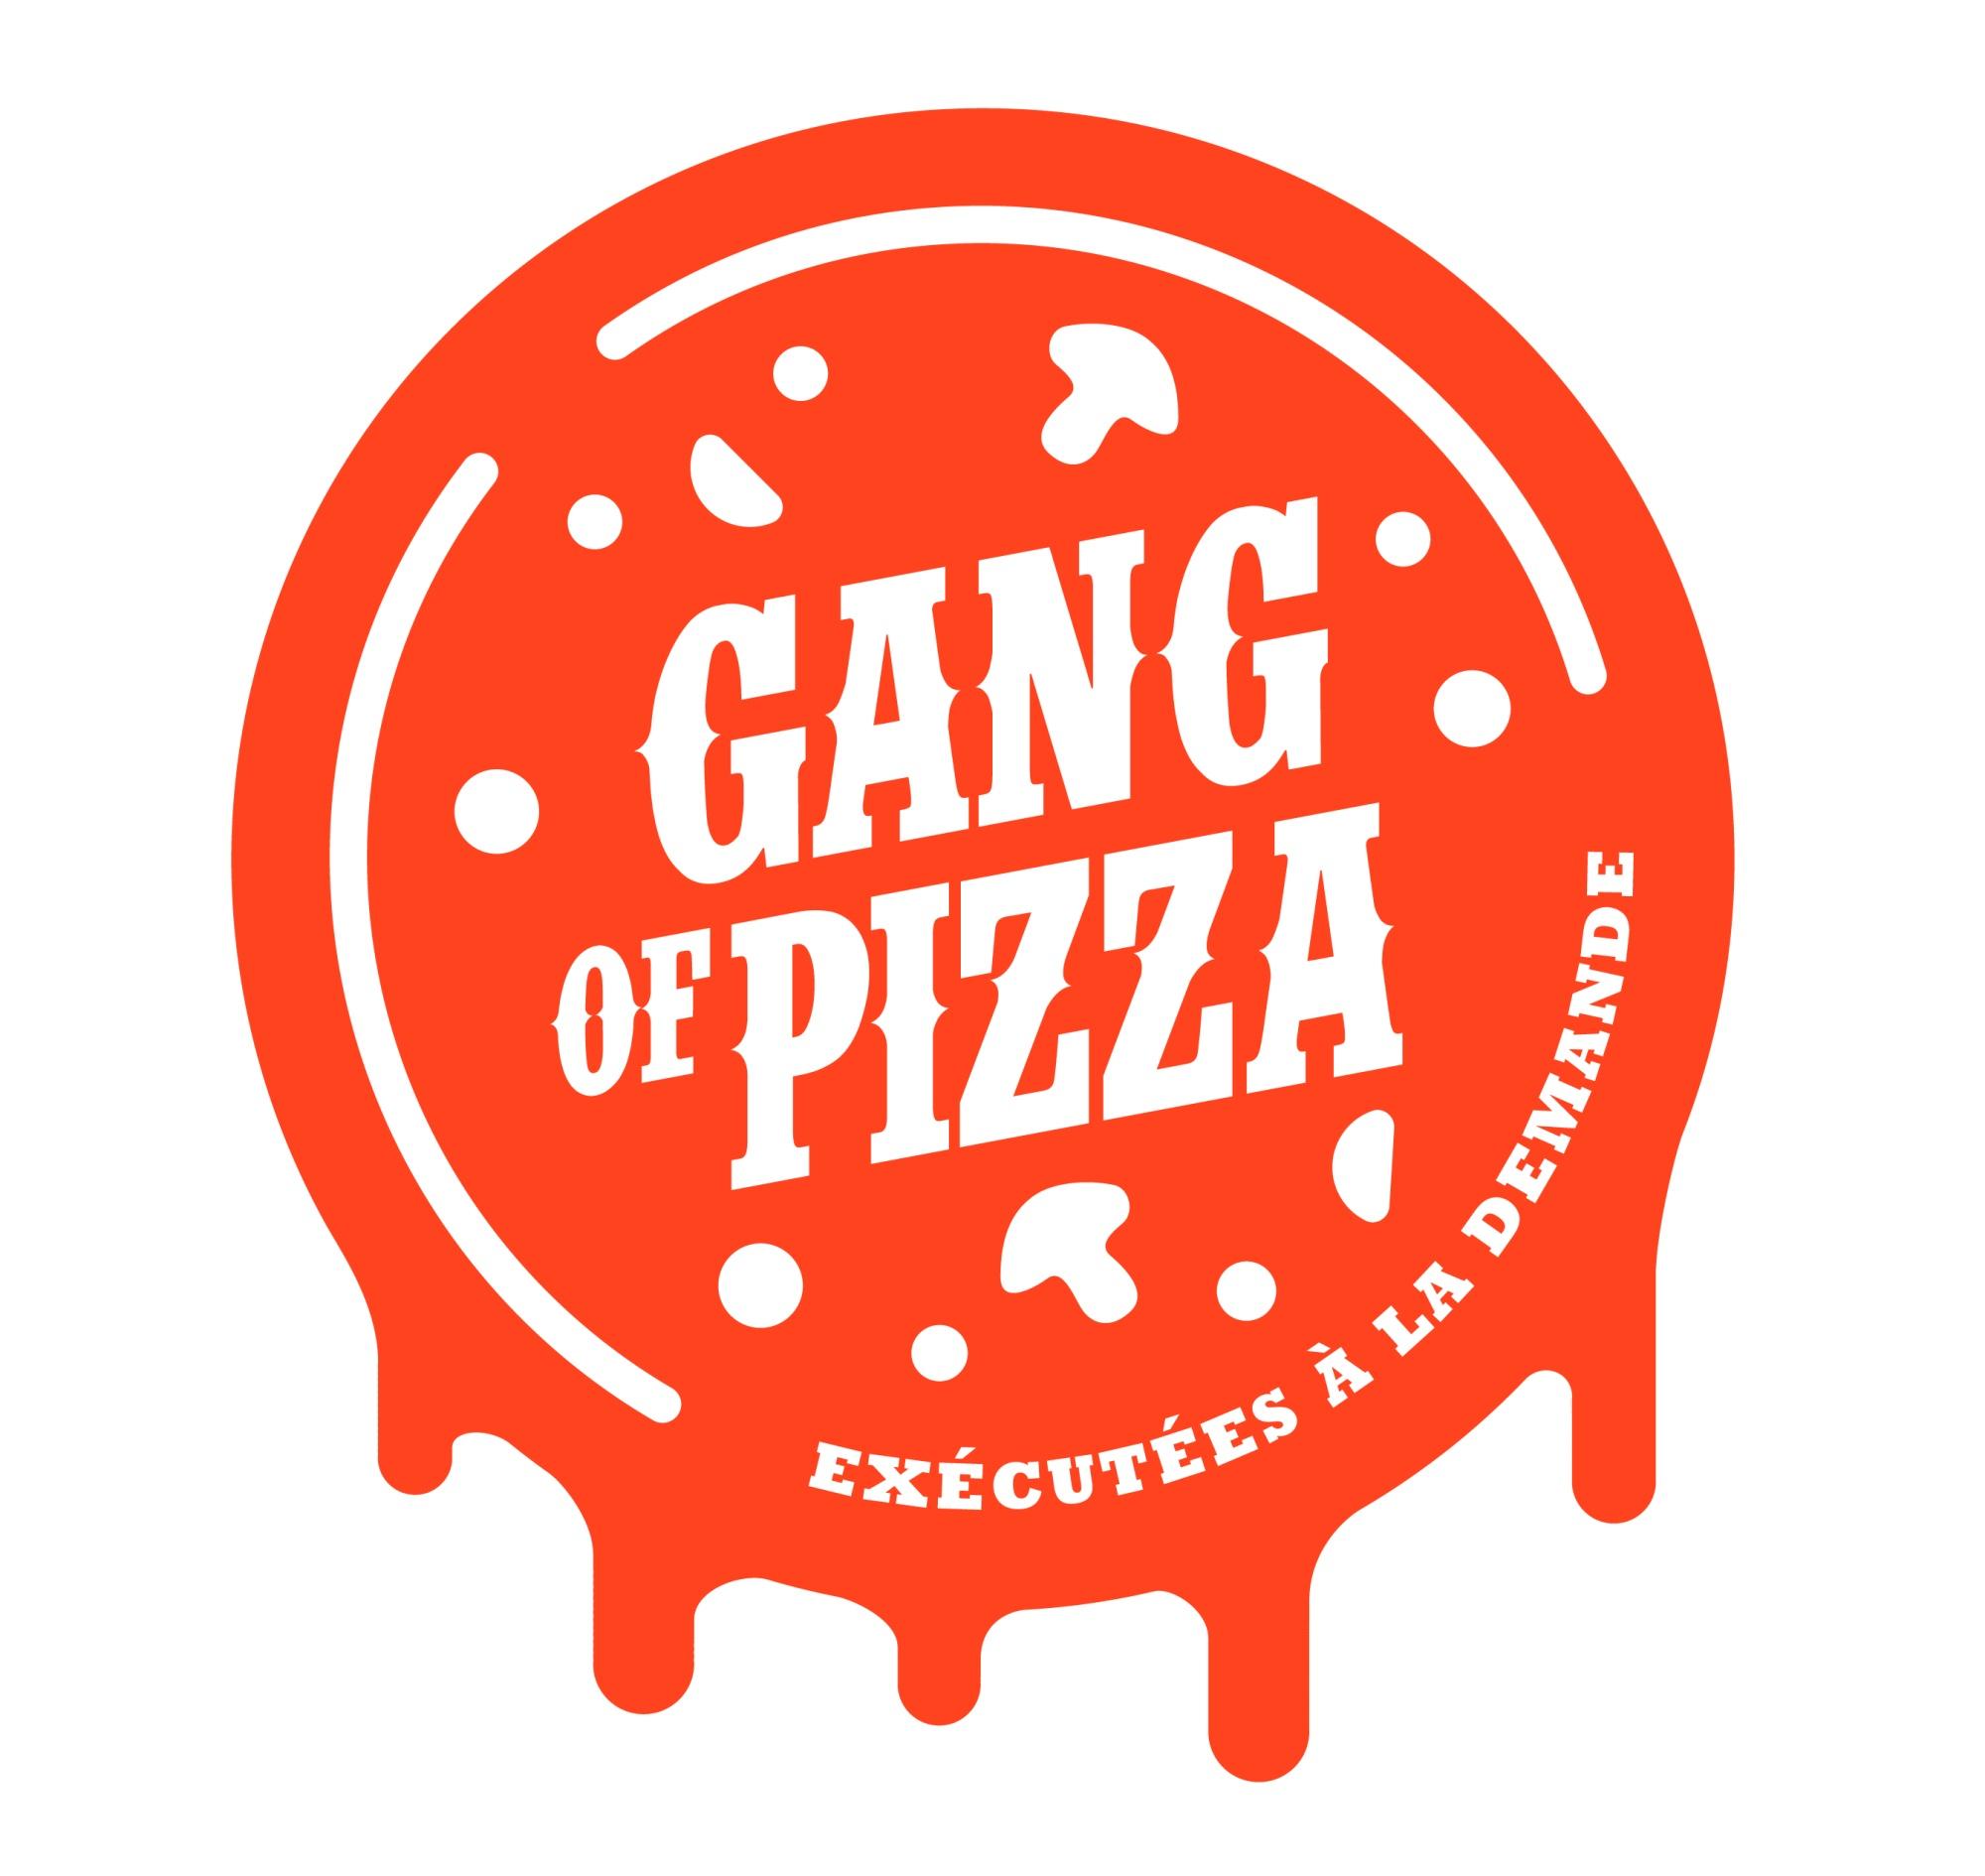 Gang Of Pizza Sion Les Mines